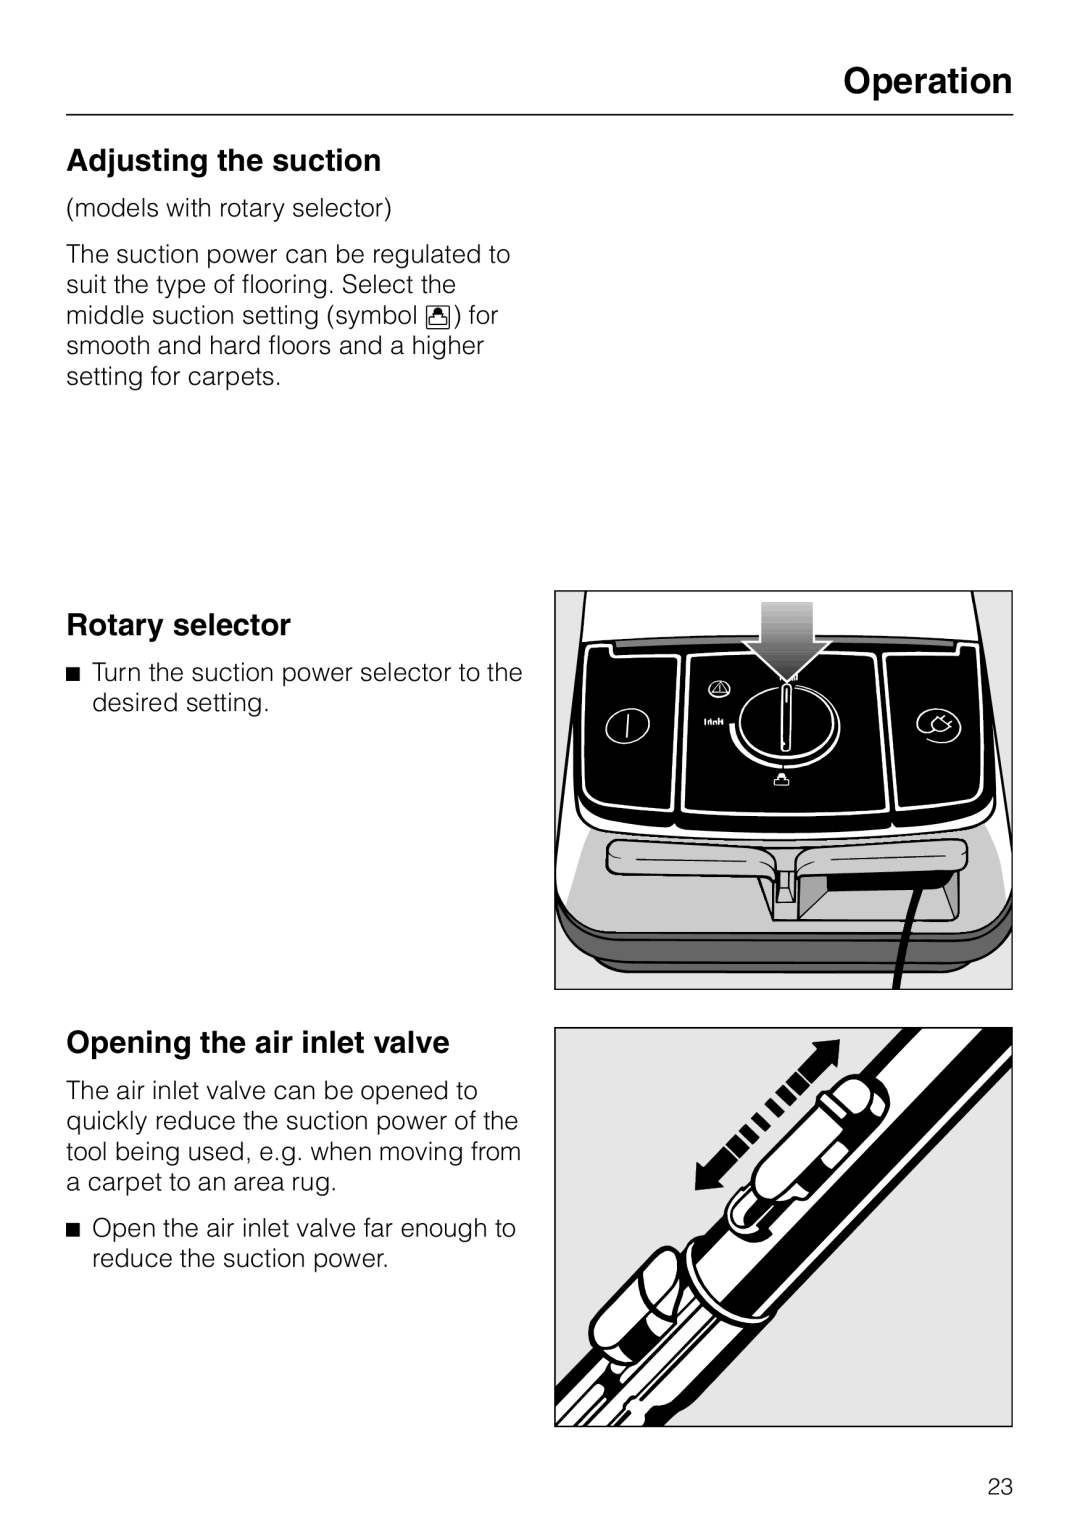 Miele S 300i - S 318i operating instructions Adjusting the suction, Rotary selector, Opening the air inlet valve, Operation 